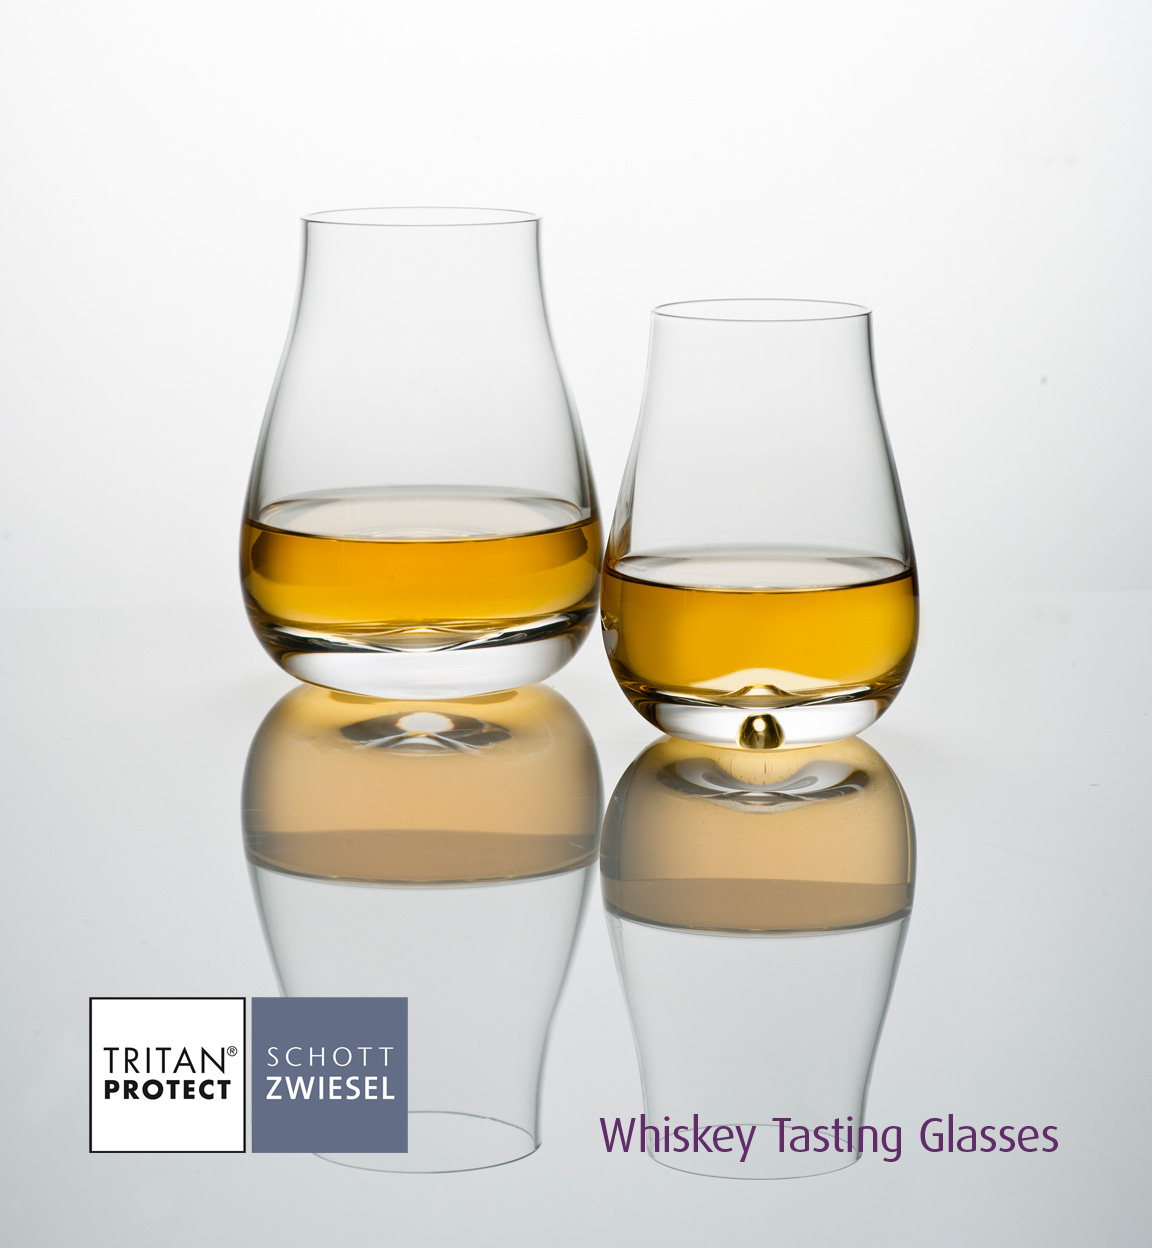 see the world through whiskey glasses